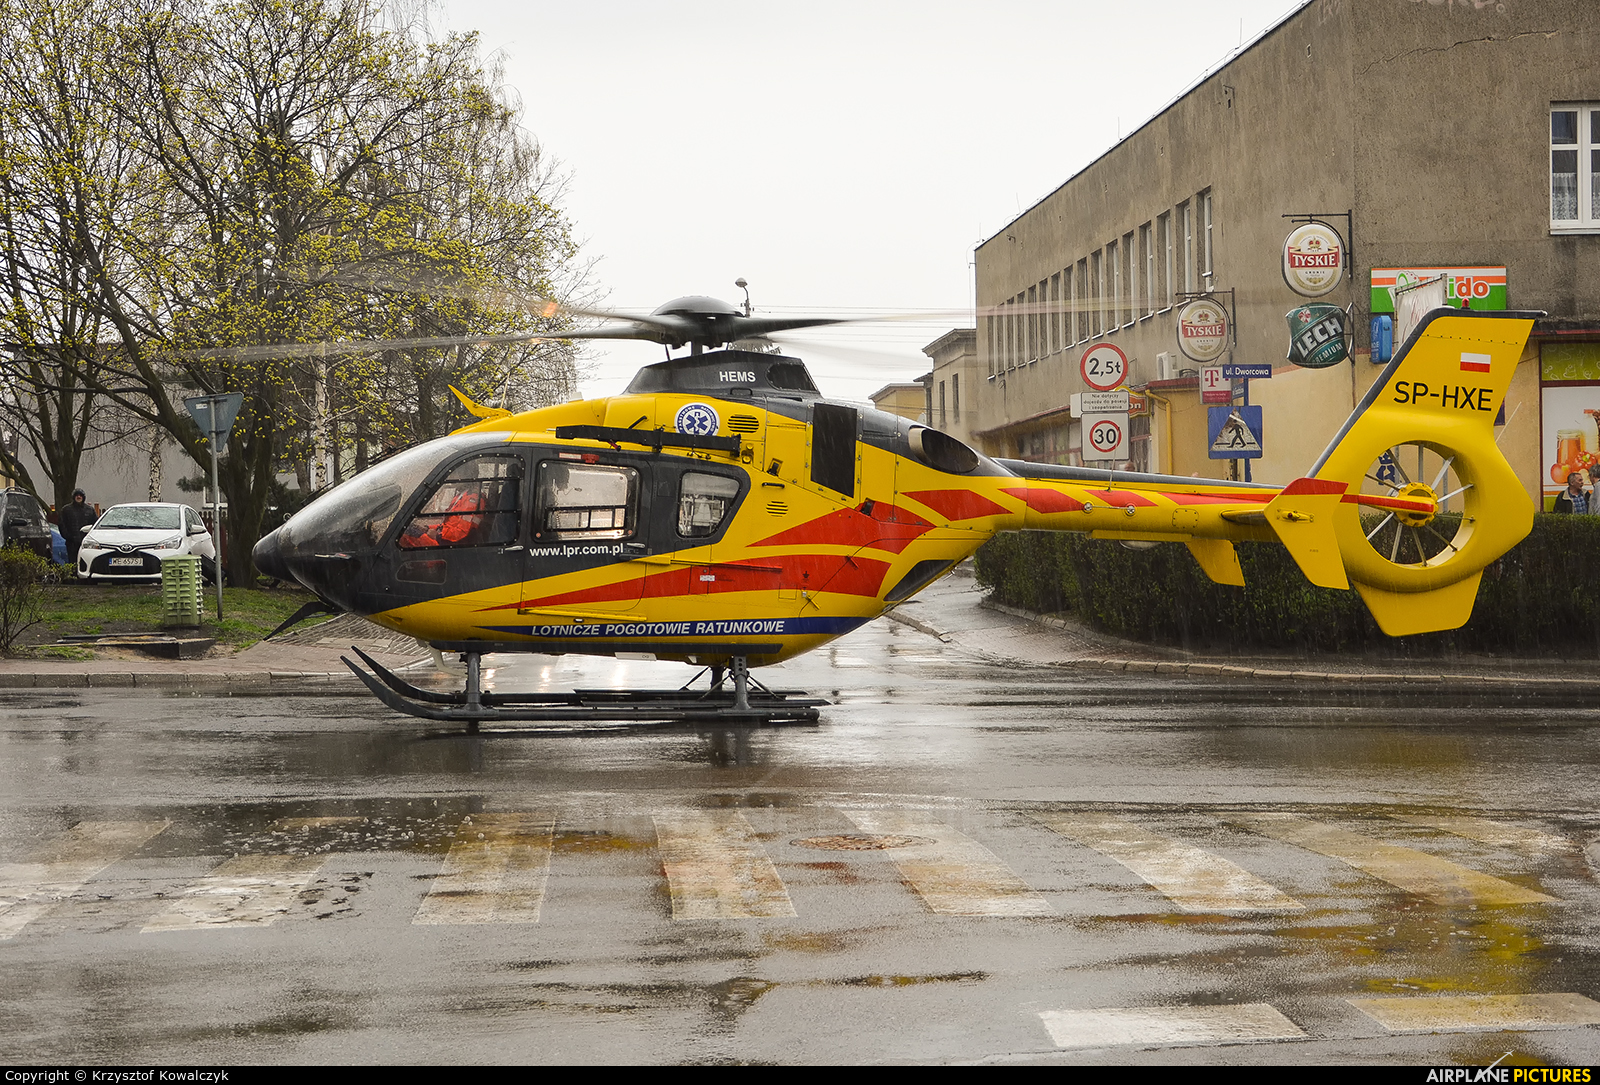 Polish Medical Air Rescue - Lotnicze Pogotowie Ratunkowe SP-HXE aircraft at Off Airport - Poland